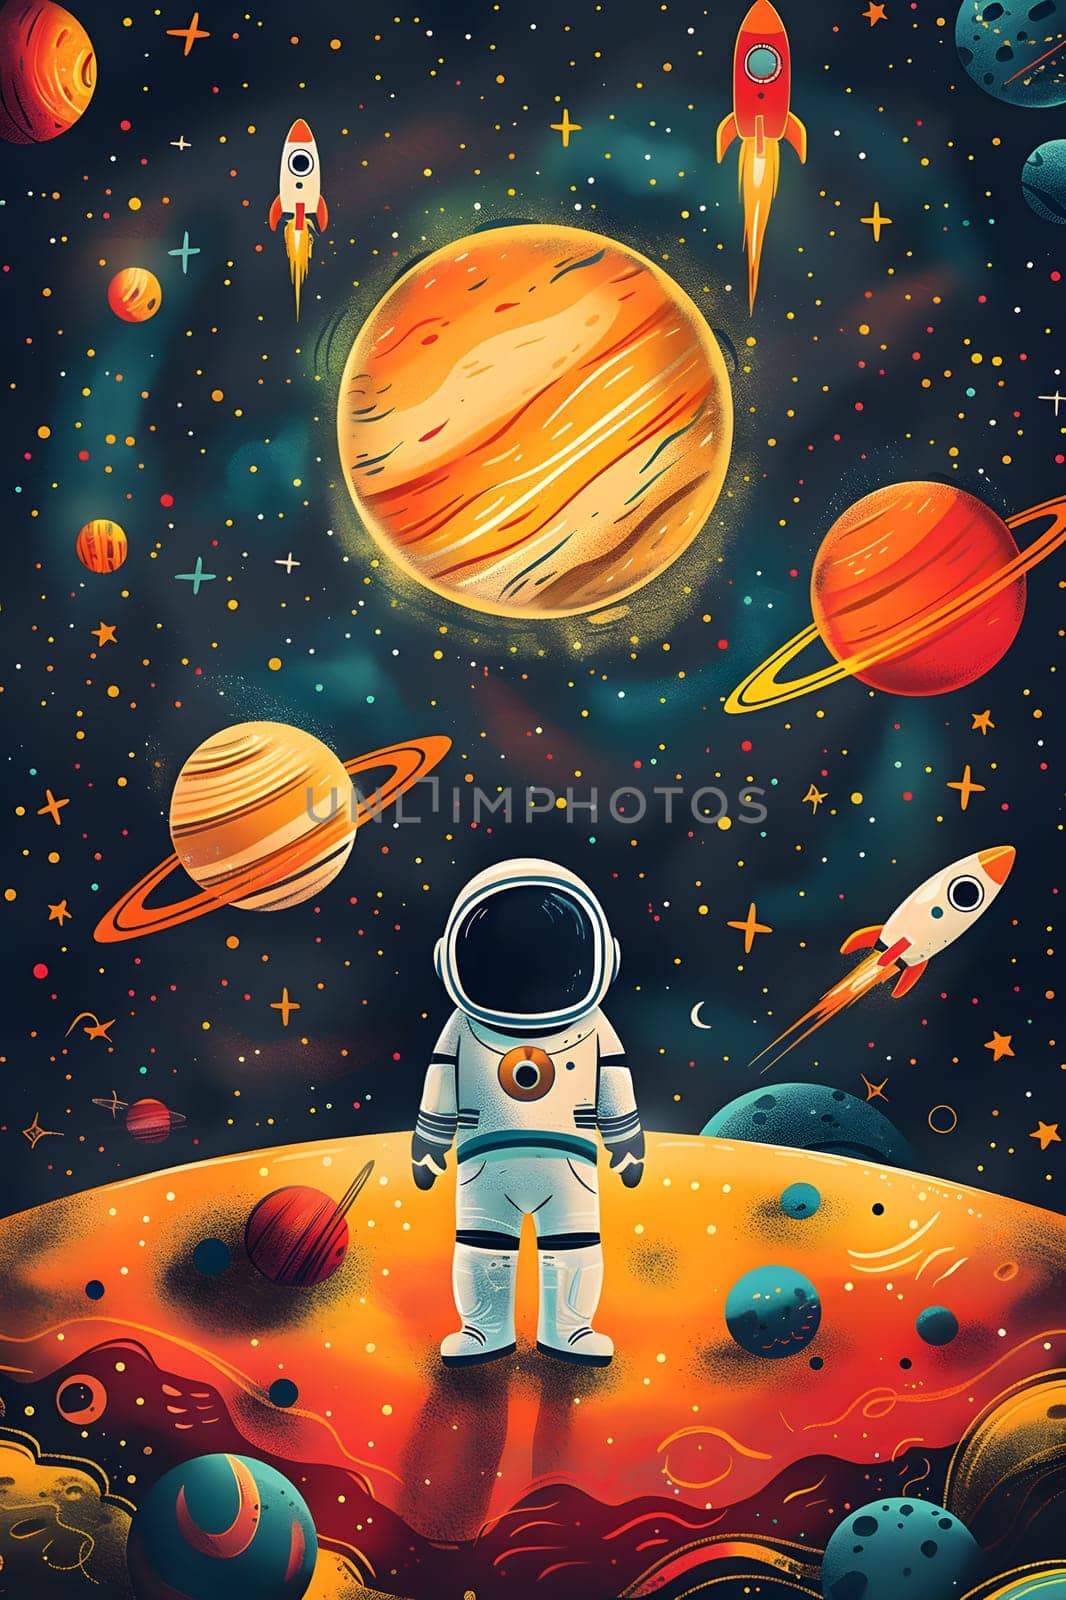 an astronaut is standing on a planet in space surrounded by planets and rockets by Nadtochiy